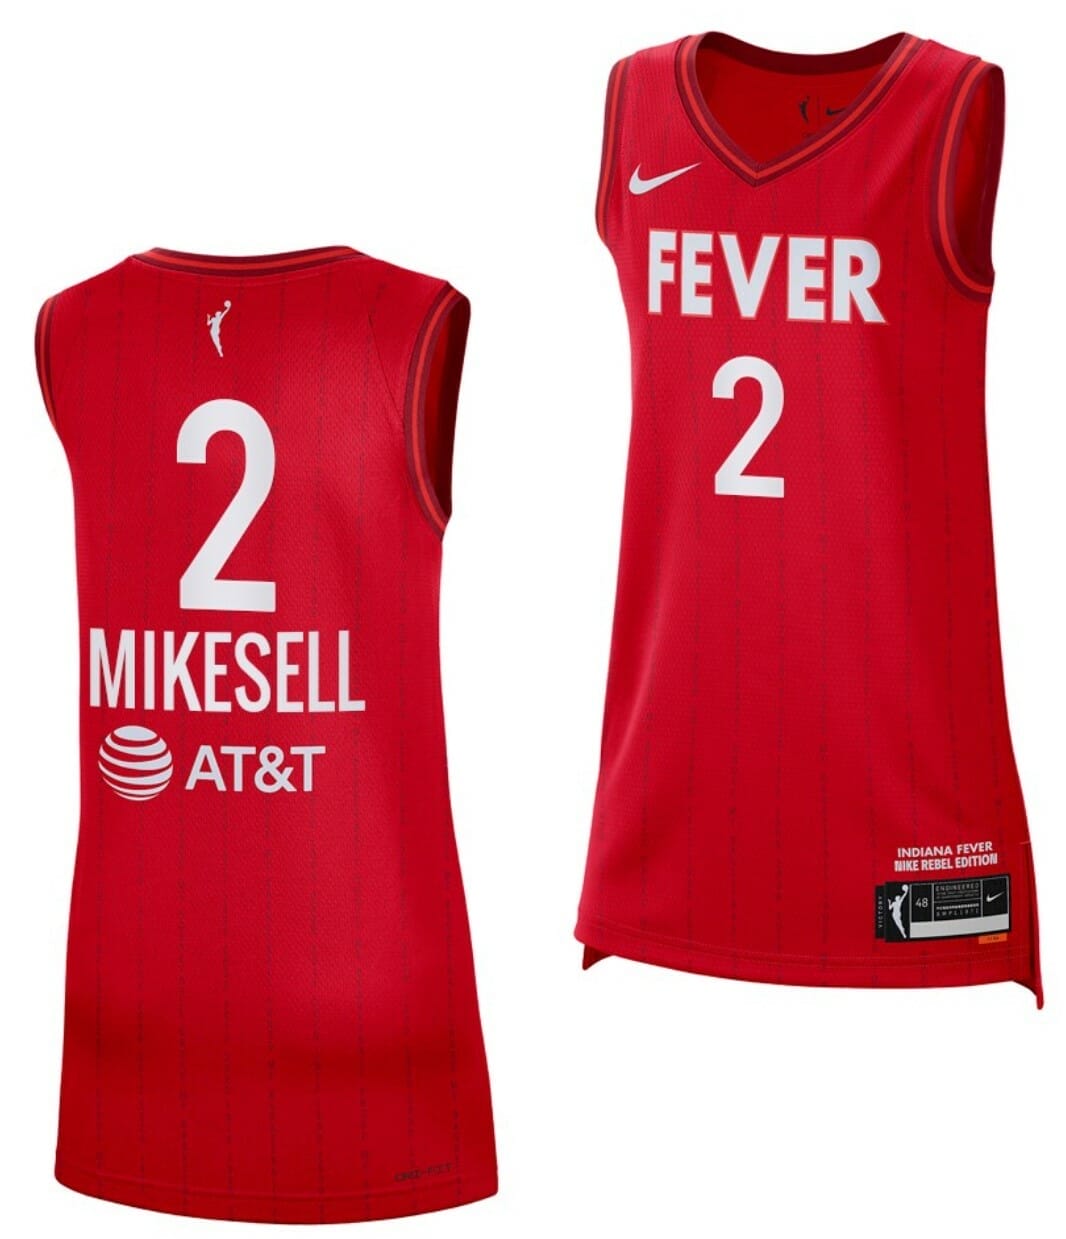 Top Players College Basketball Jerseys Taylor Mikesell Jersey Rebel Edition Indiana Fever 2023 WNBA Draft Red #2